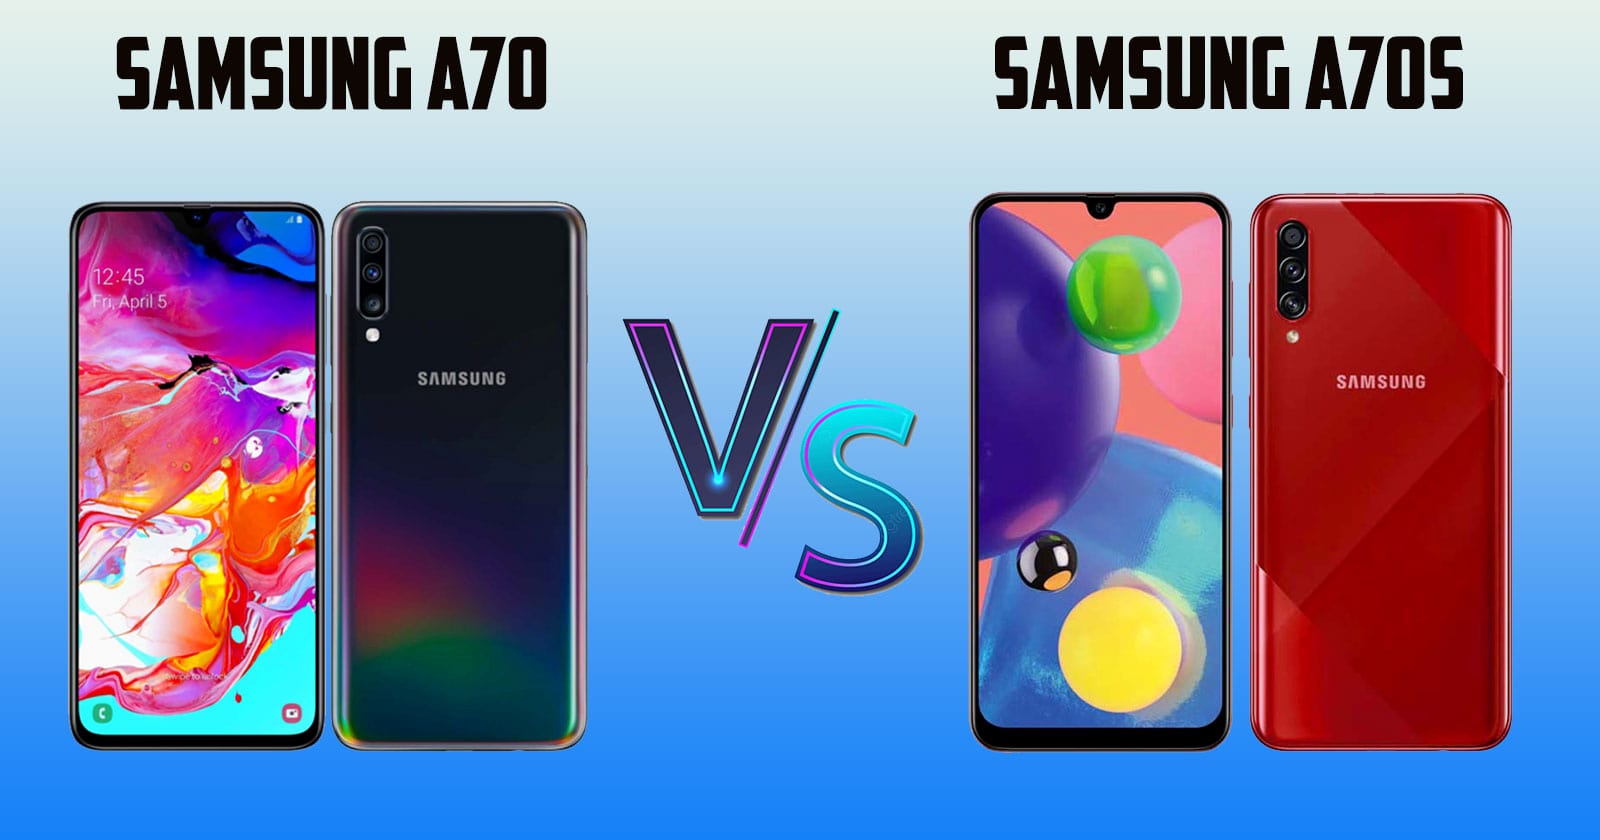 What Is the Difference Between Samsung A70 and A70s